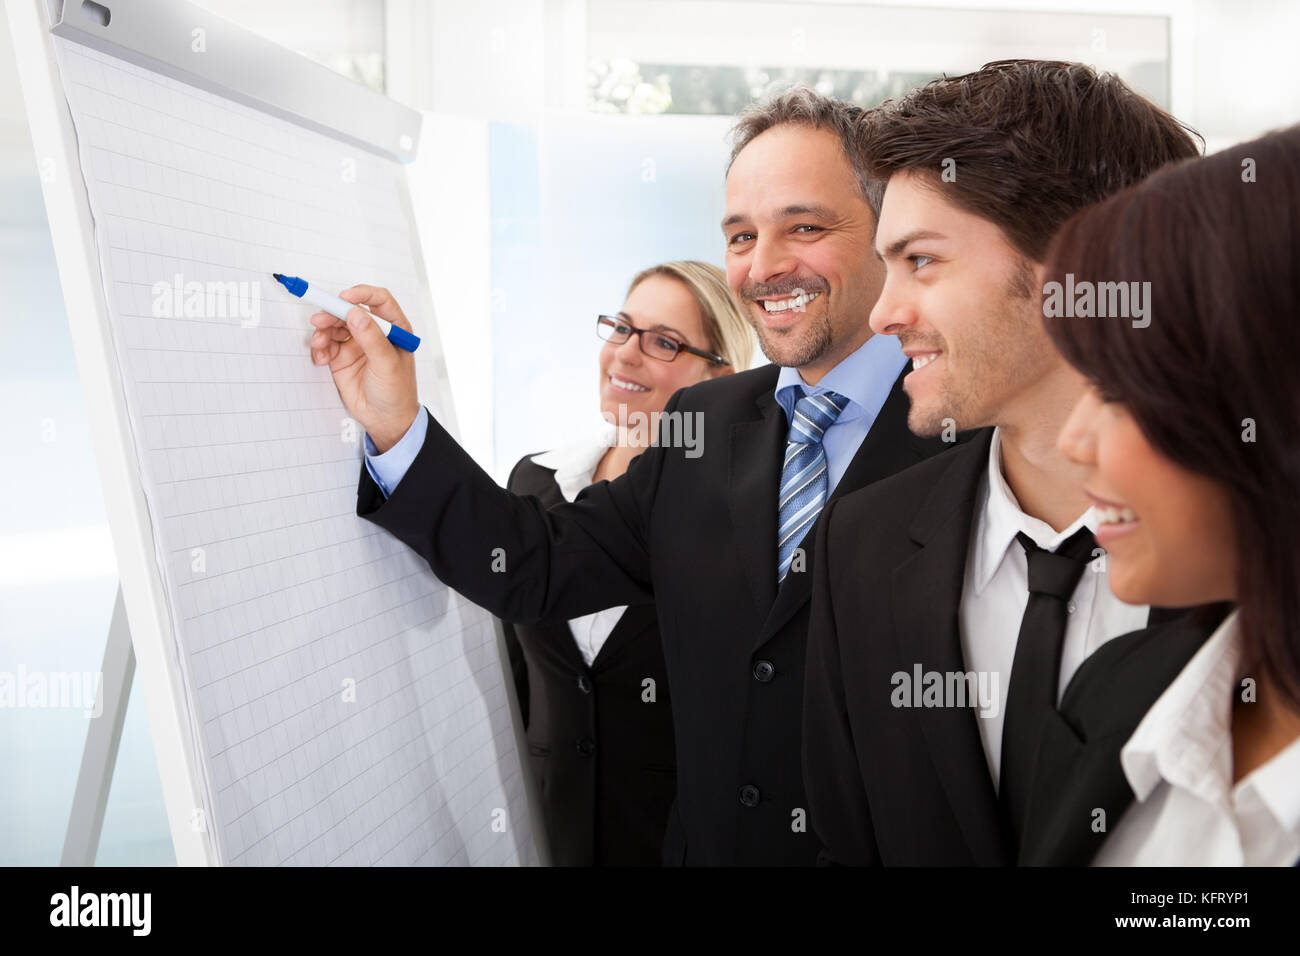 Group of business people looking at the graph on flipchart Stock Photo